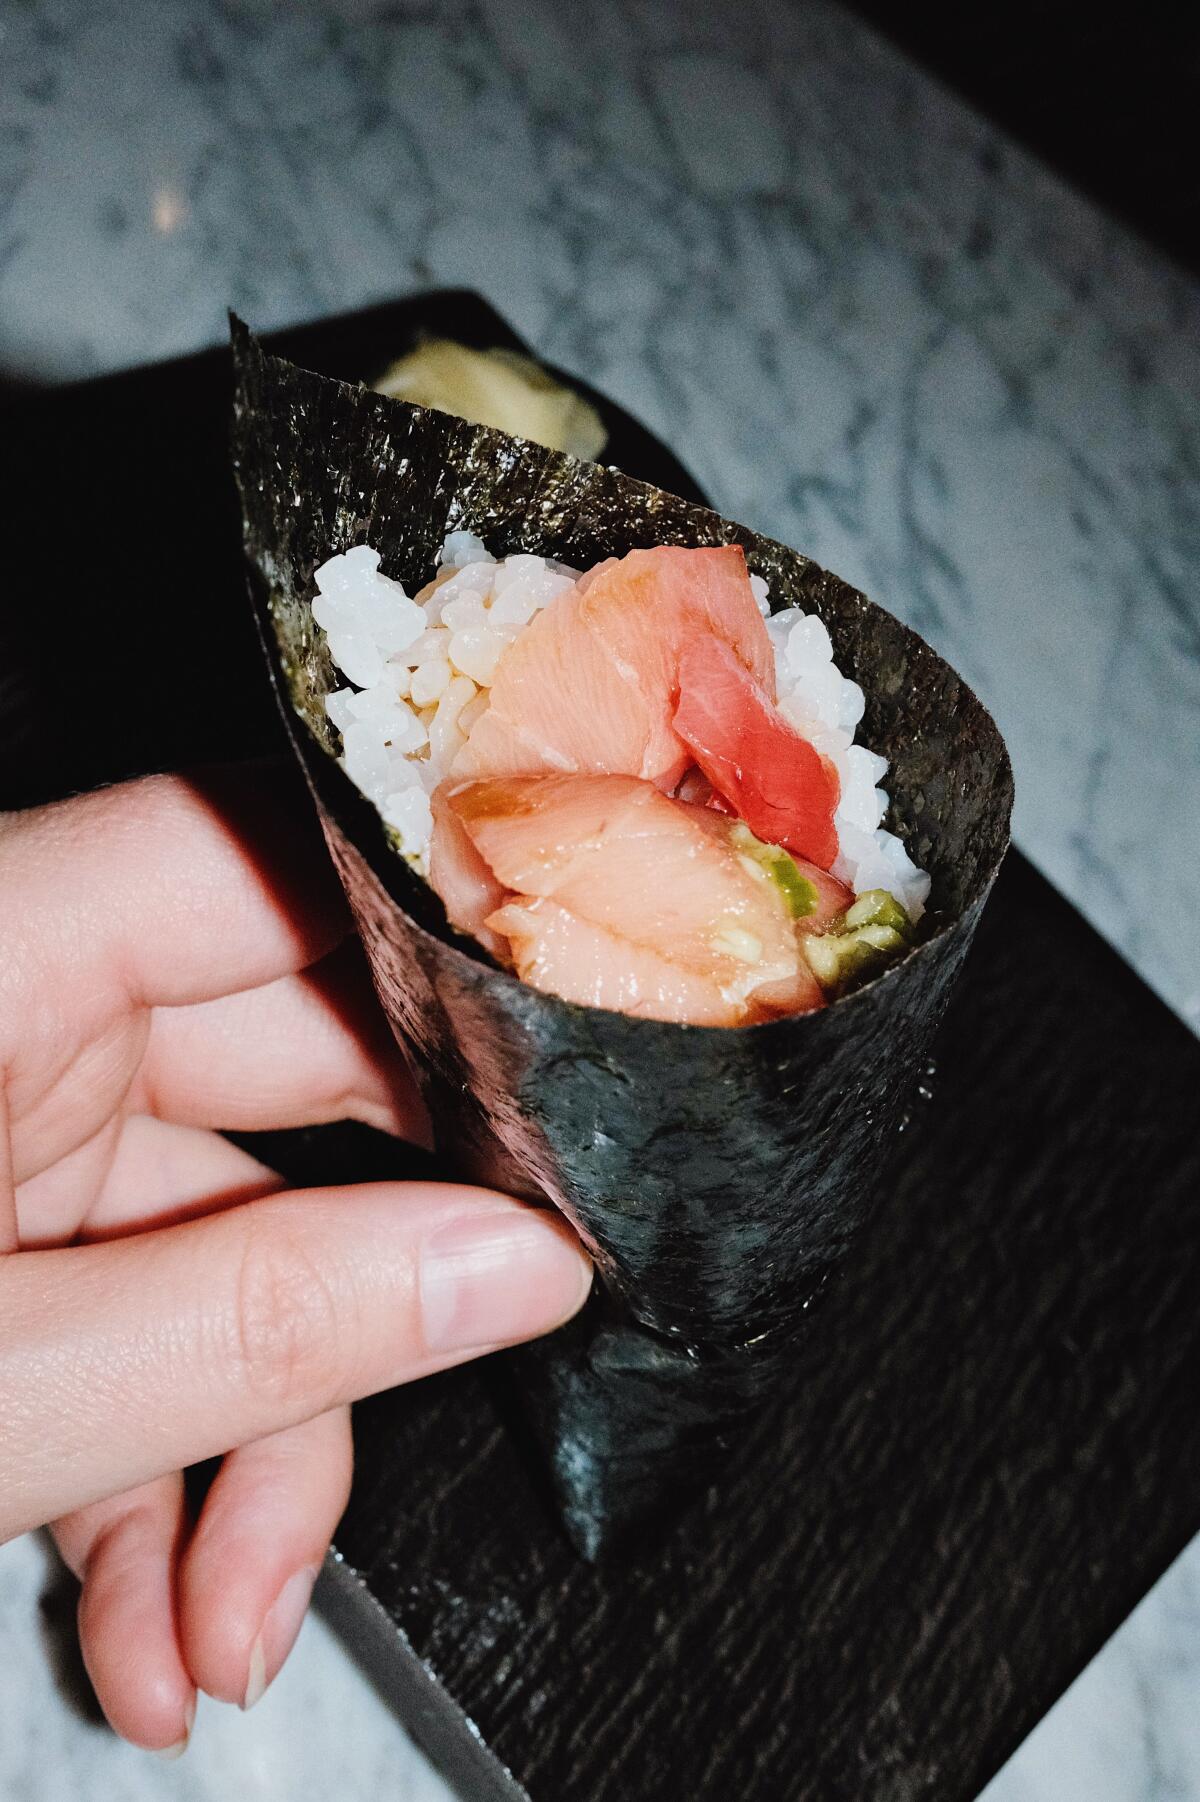 A vertical closeup of a hand holding a conical hand roll bursting with fish at Iki Nori sushi bar in Hollywood.